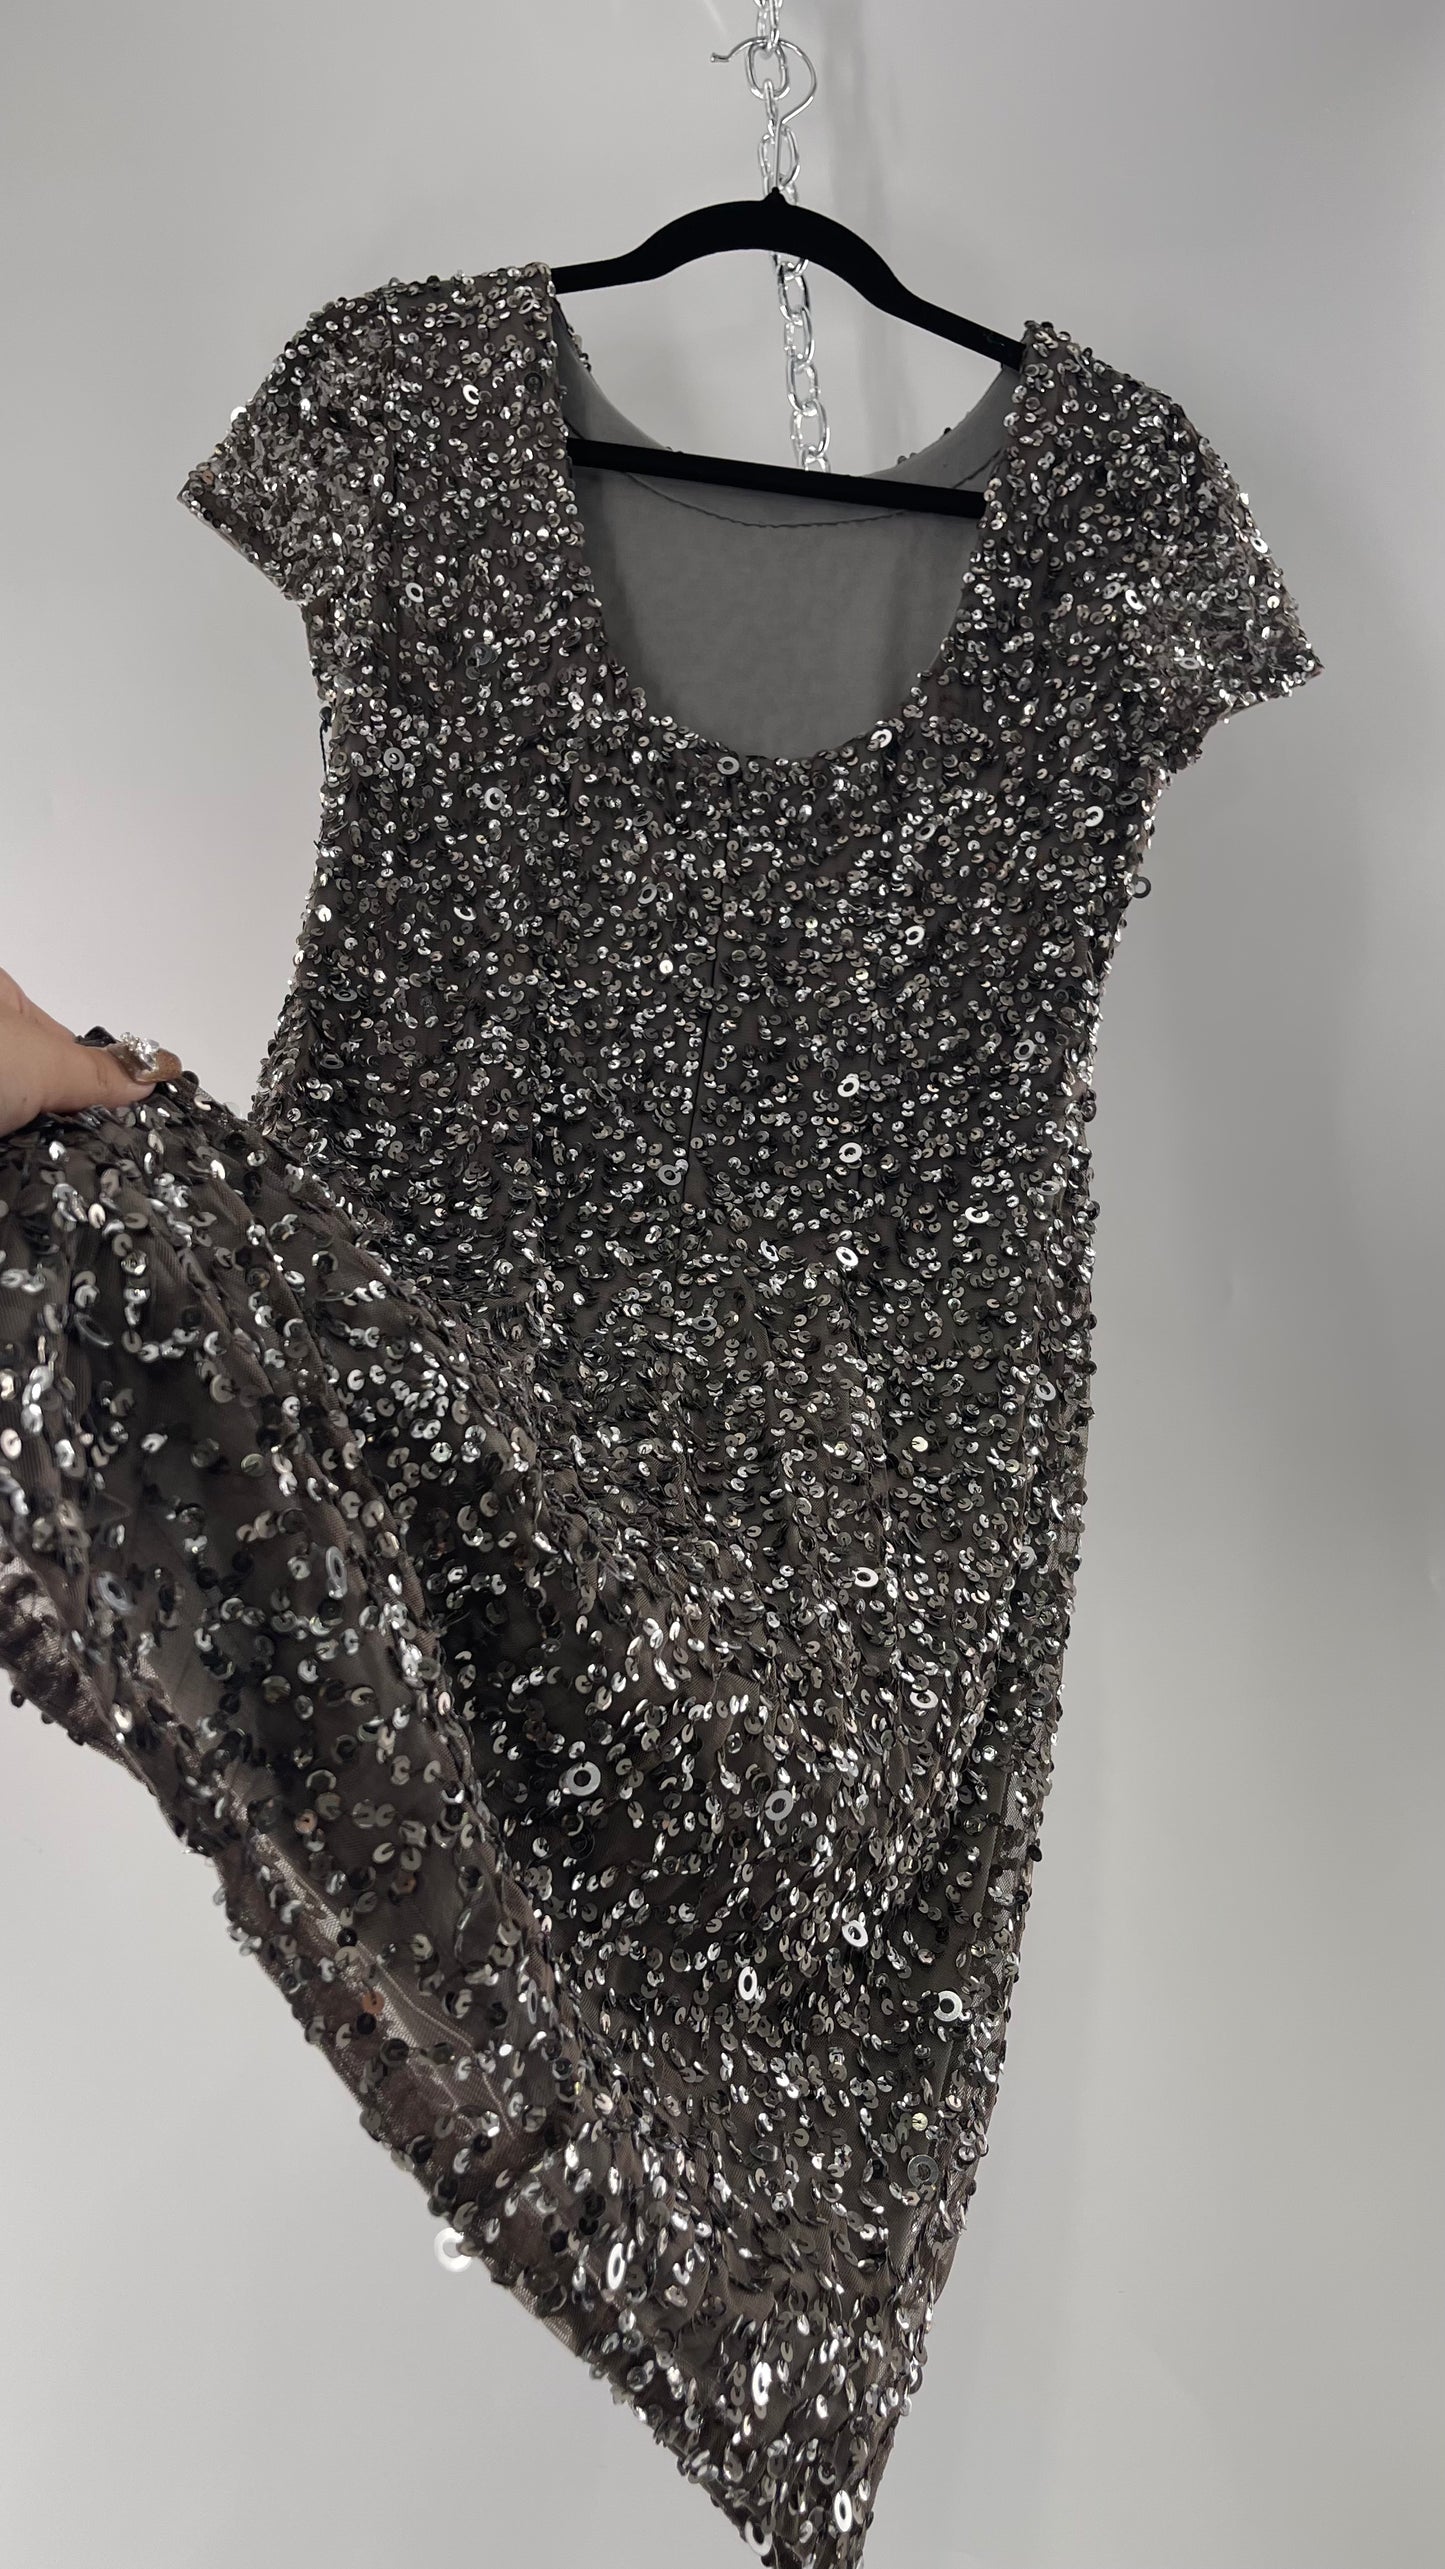 Adriana Papell Grey/Silver Short Sleeve Mini Dress Covered in Beads and Sequins (6)